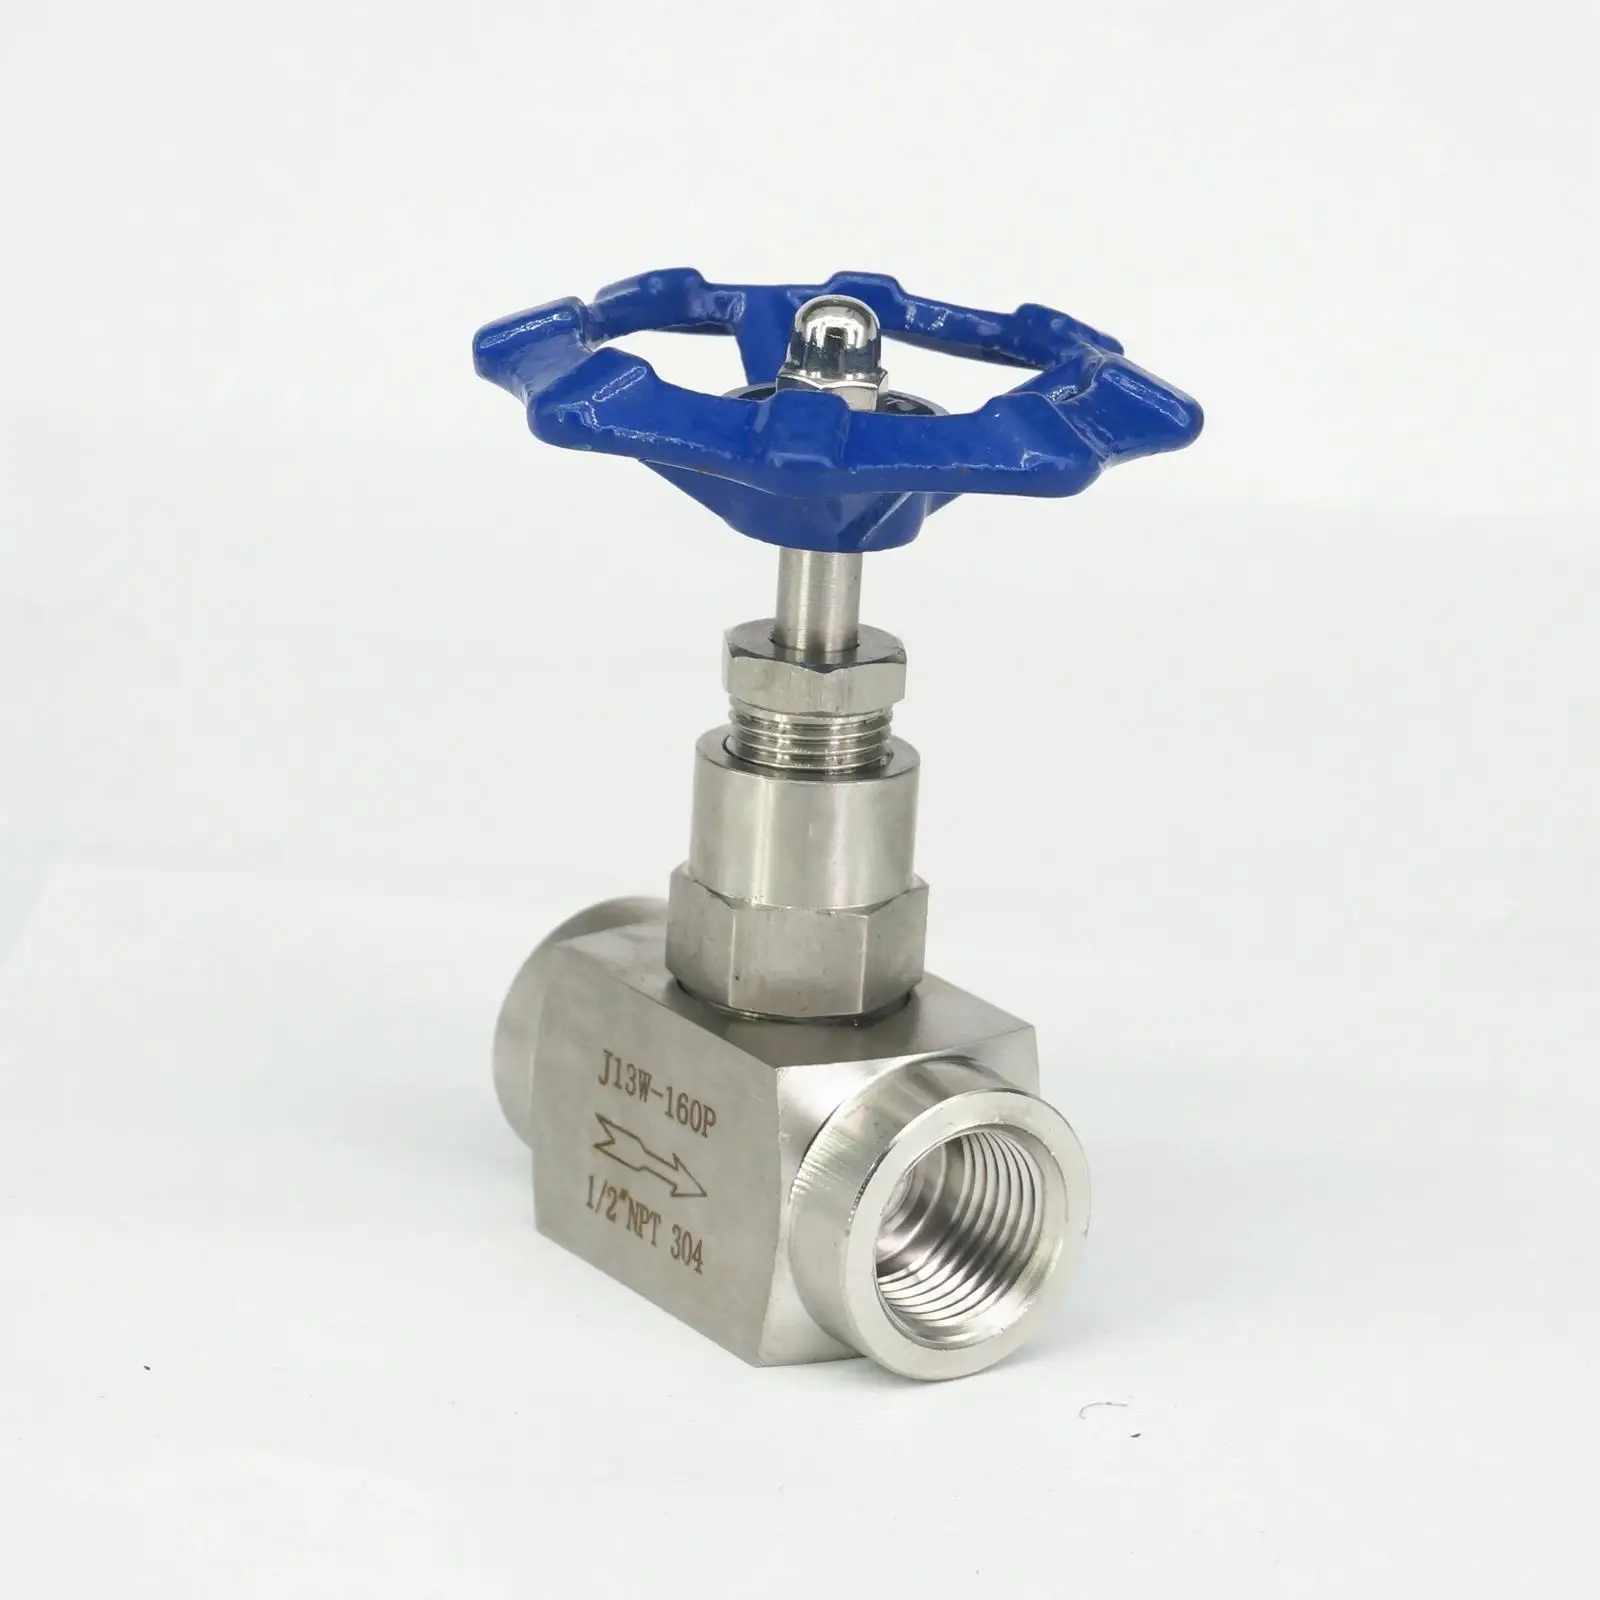 BYOLPMKK 2Pcs/5Pcs 1/8 1/4 3/8 1/2 ZG Male Thread Stainless Steel 304 Needle Valve Right Angle 90 Flow Control valve For Water Air Relief Valves Specification : 1/4, Thread Type : 2Pcs 